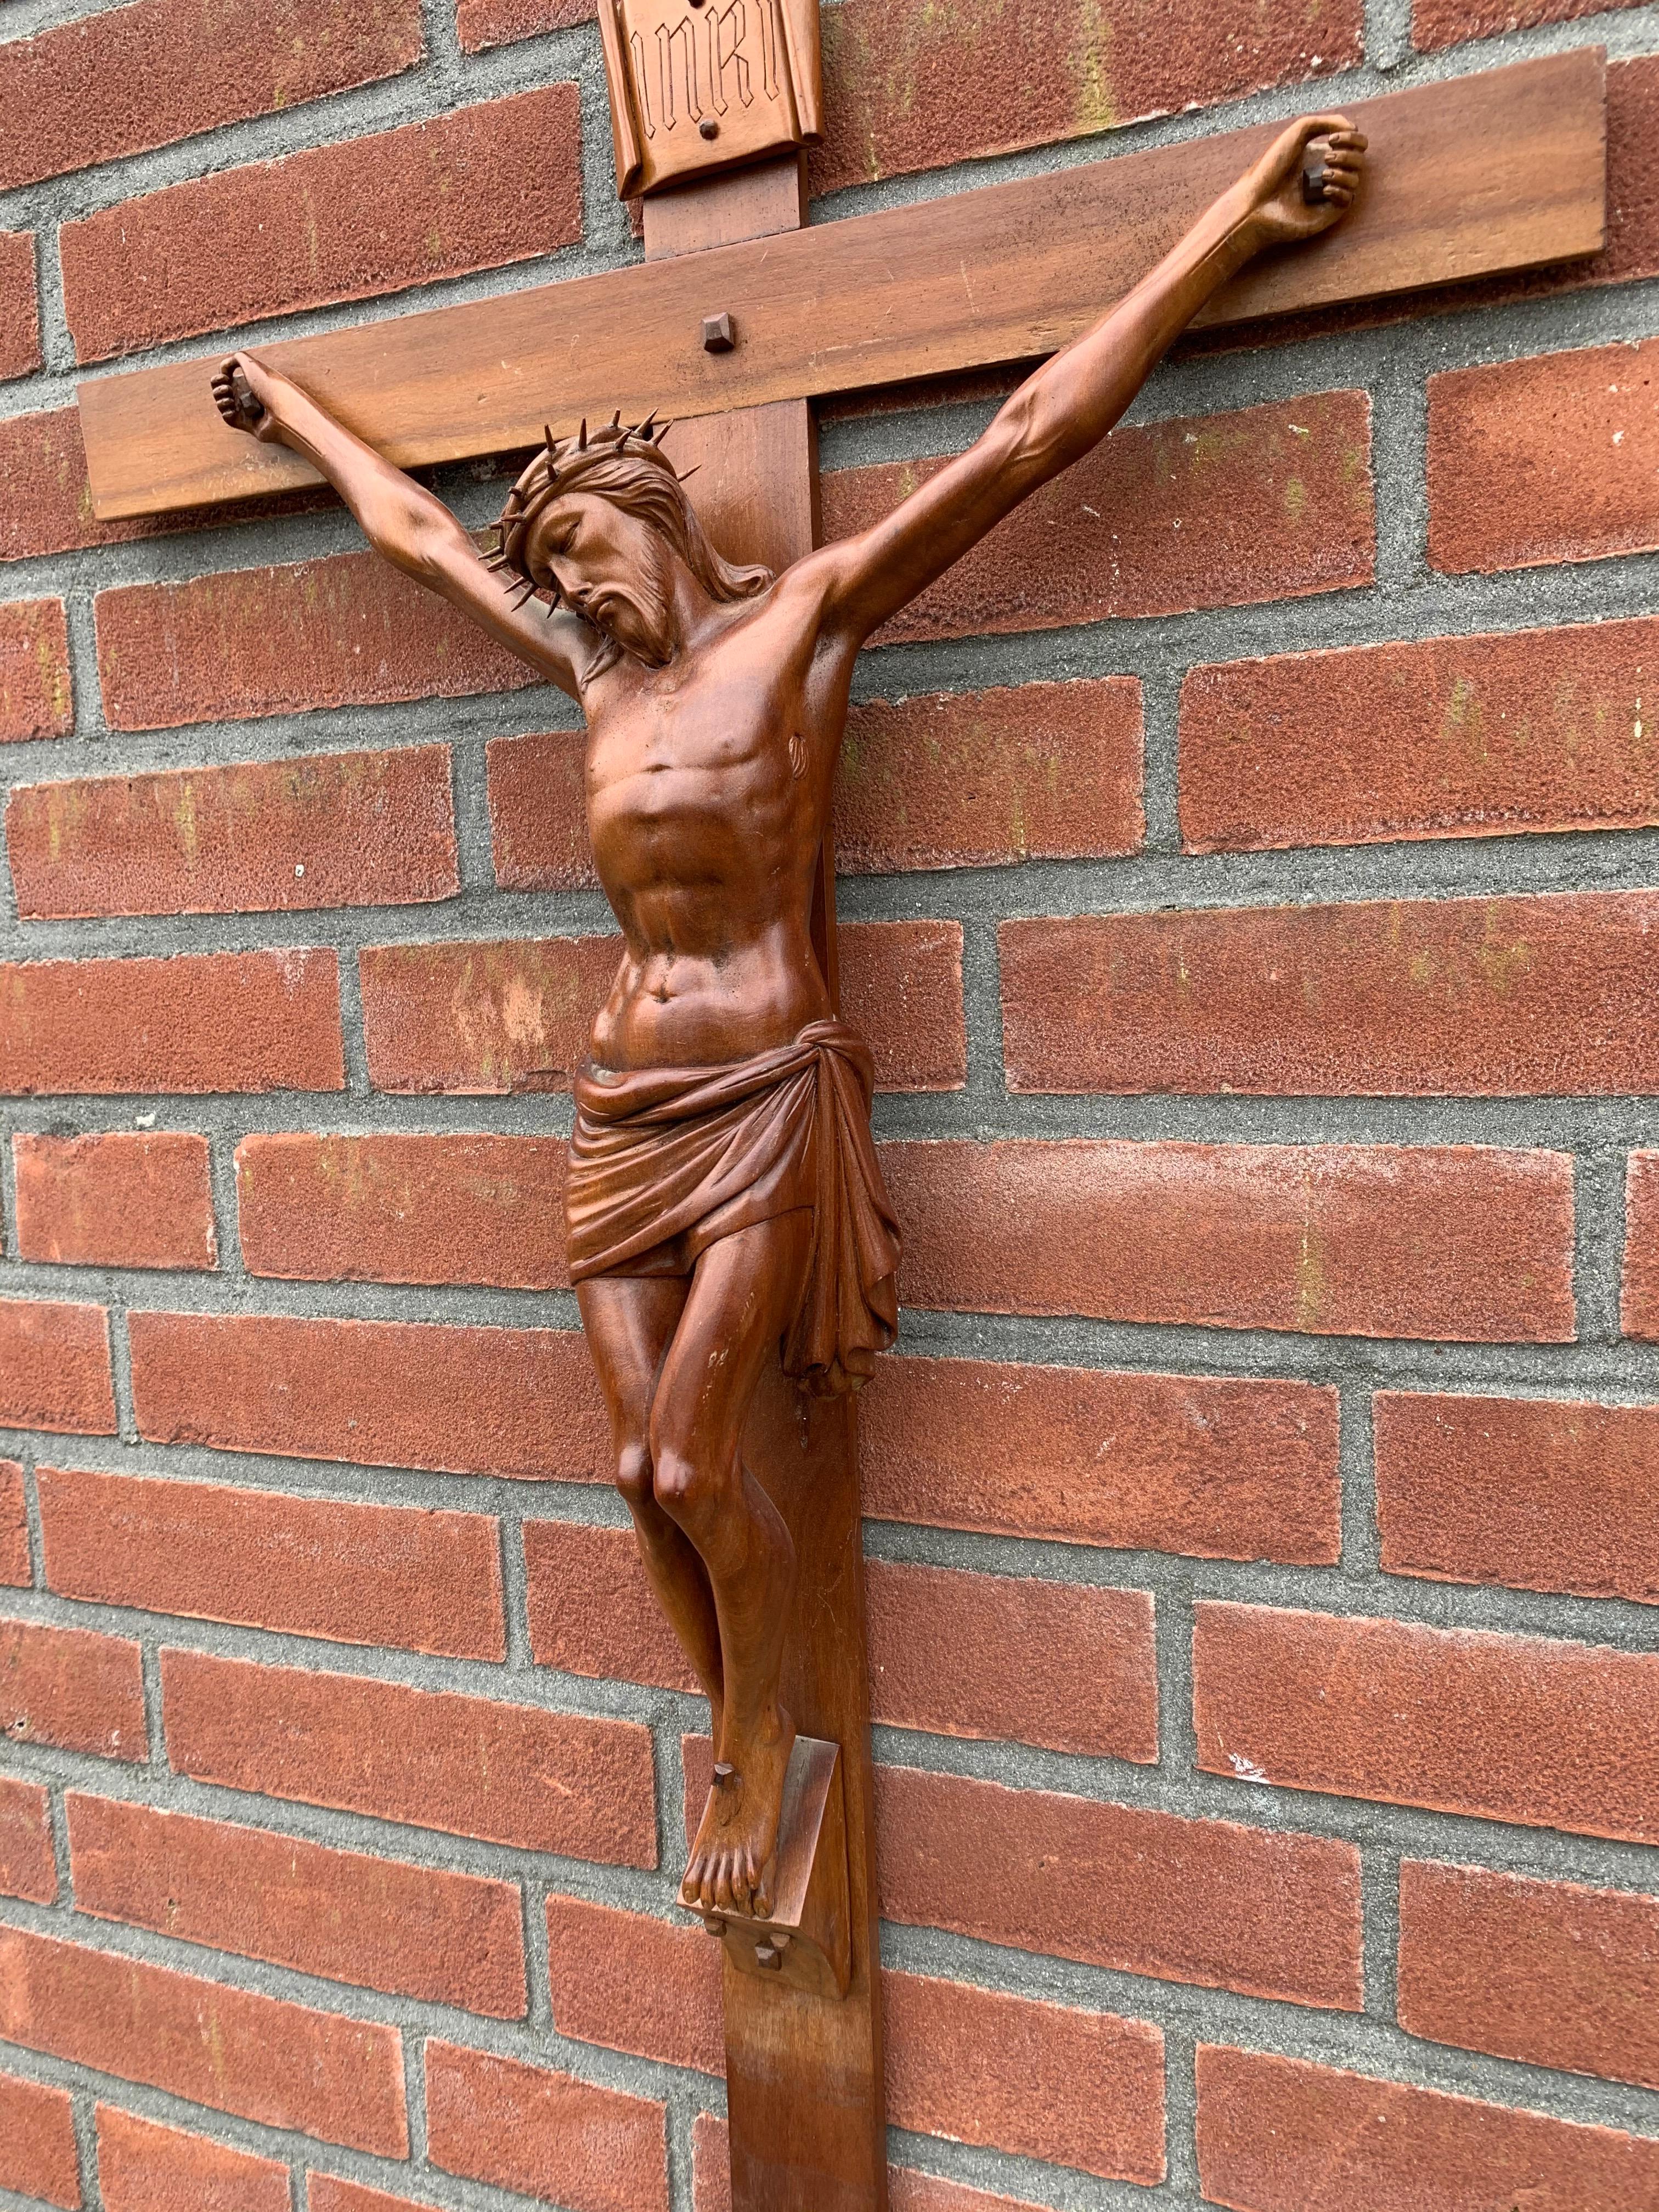 Sizeable crucifix with a quality carved corpus of Christ with unique facial features.

Looking at Christ suffering like this, the crucifix (in our view) is a symbol of what 'telling people the truth' can lead to. 'The truth does not have many